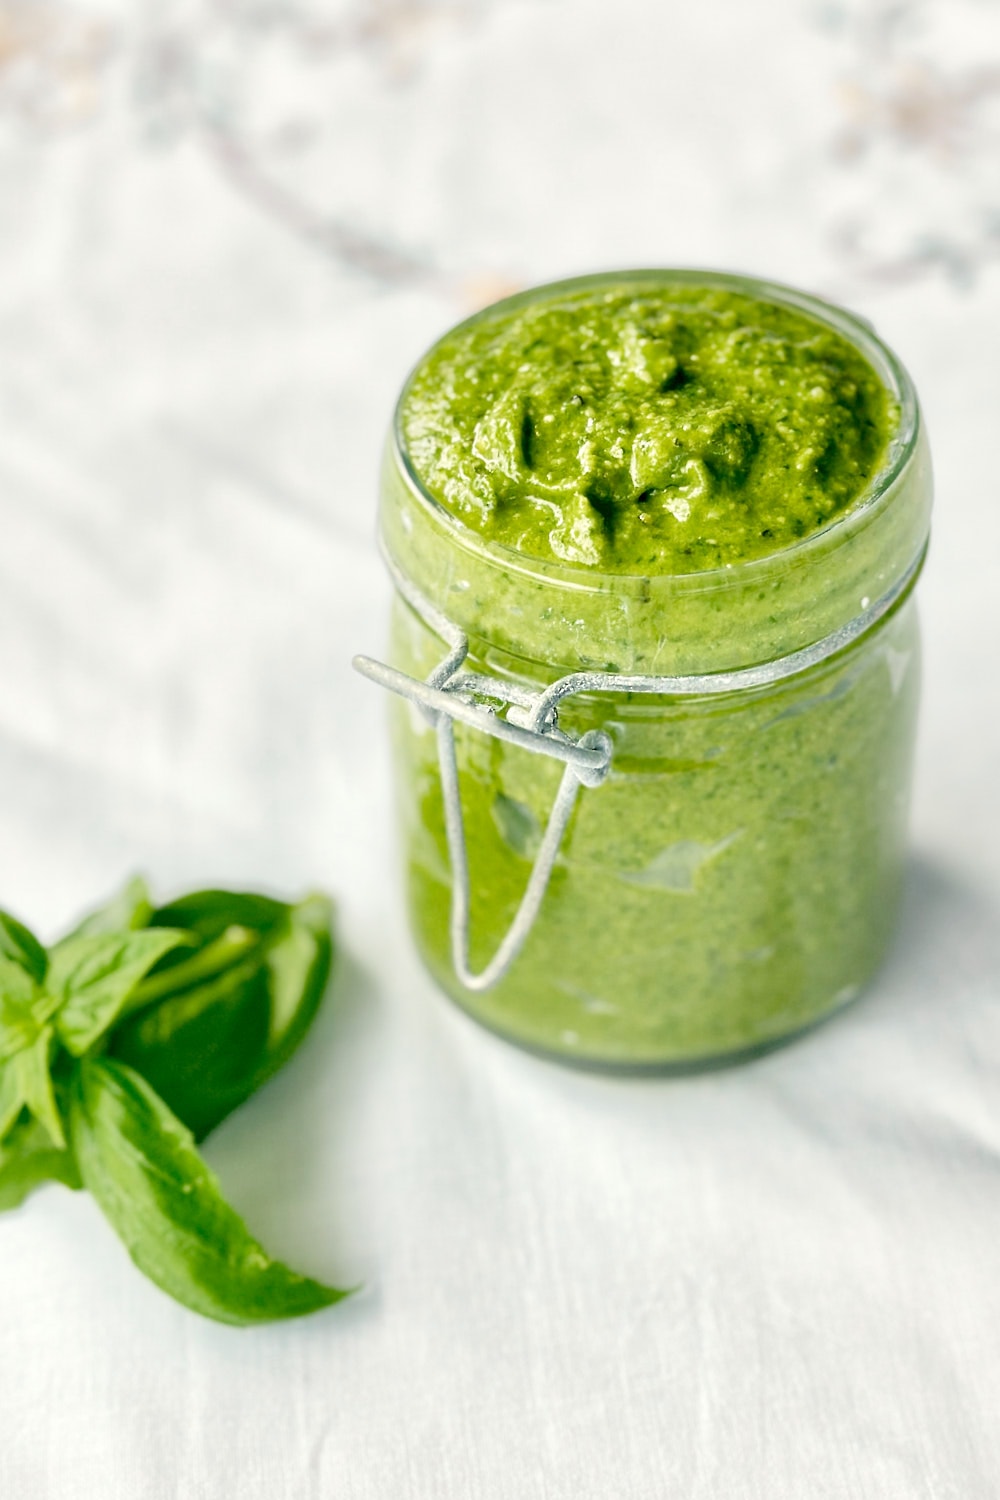 Homemade spinach and basil pesto with a vibrant green color in a small mason jar.